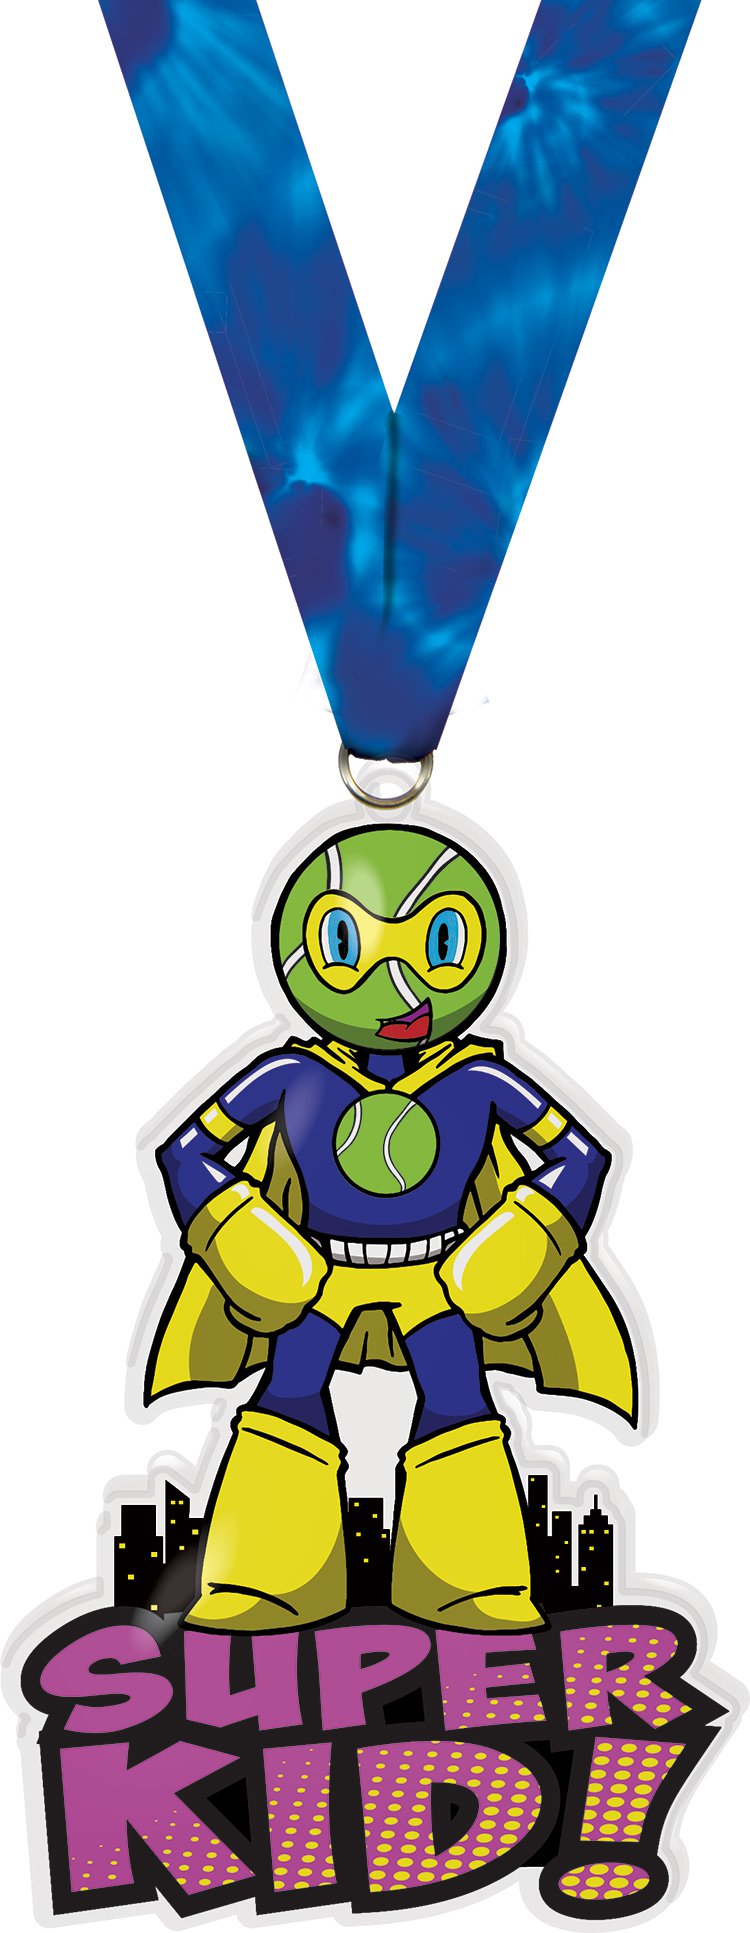 Exclusive Tennis Super Kid Acrylic Medal- 4 inch